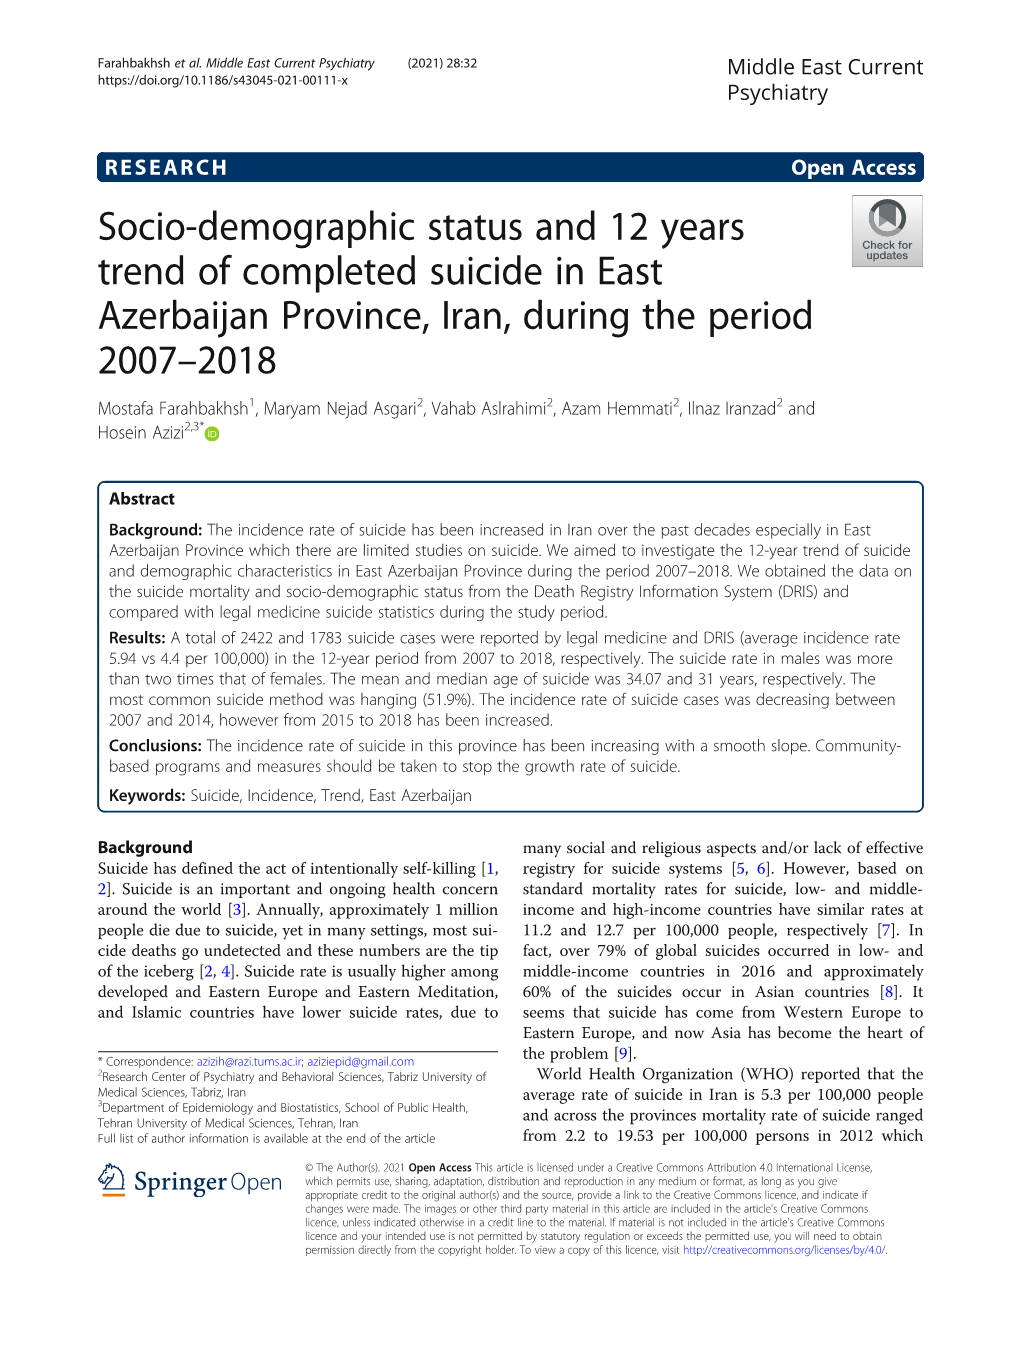 Socio-Demographic Status and 12 Years Trend of Completed Suicide In